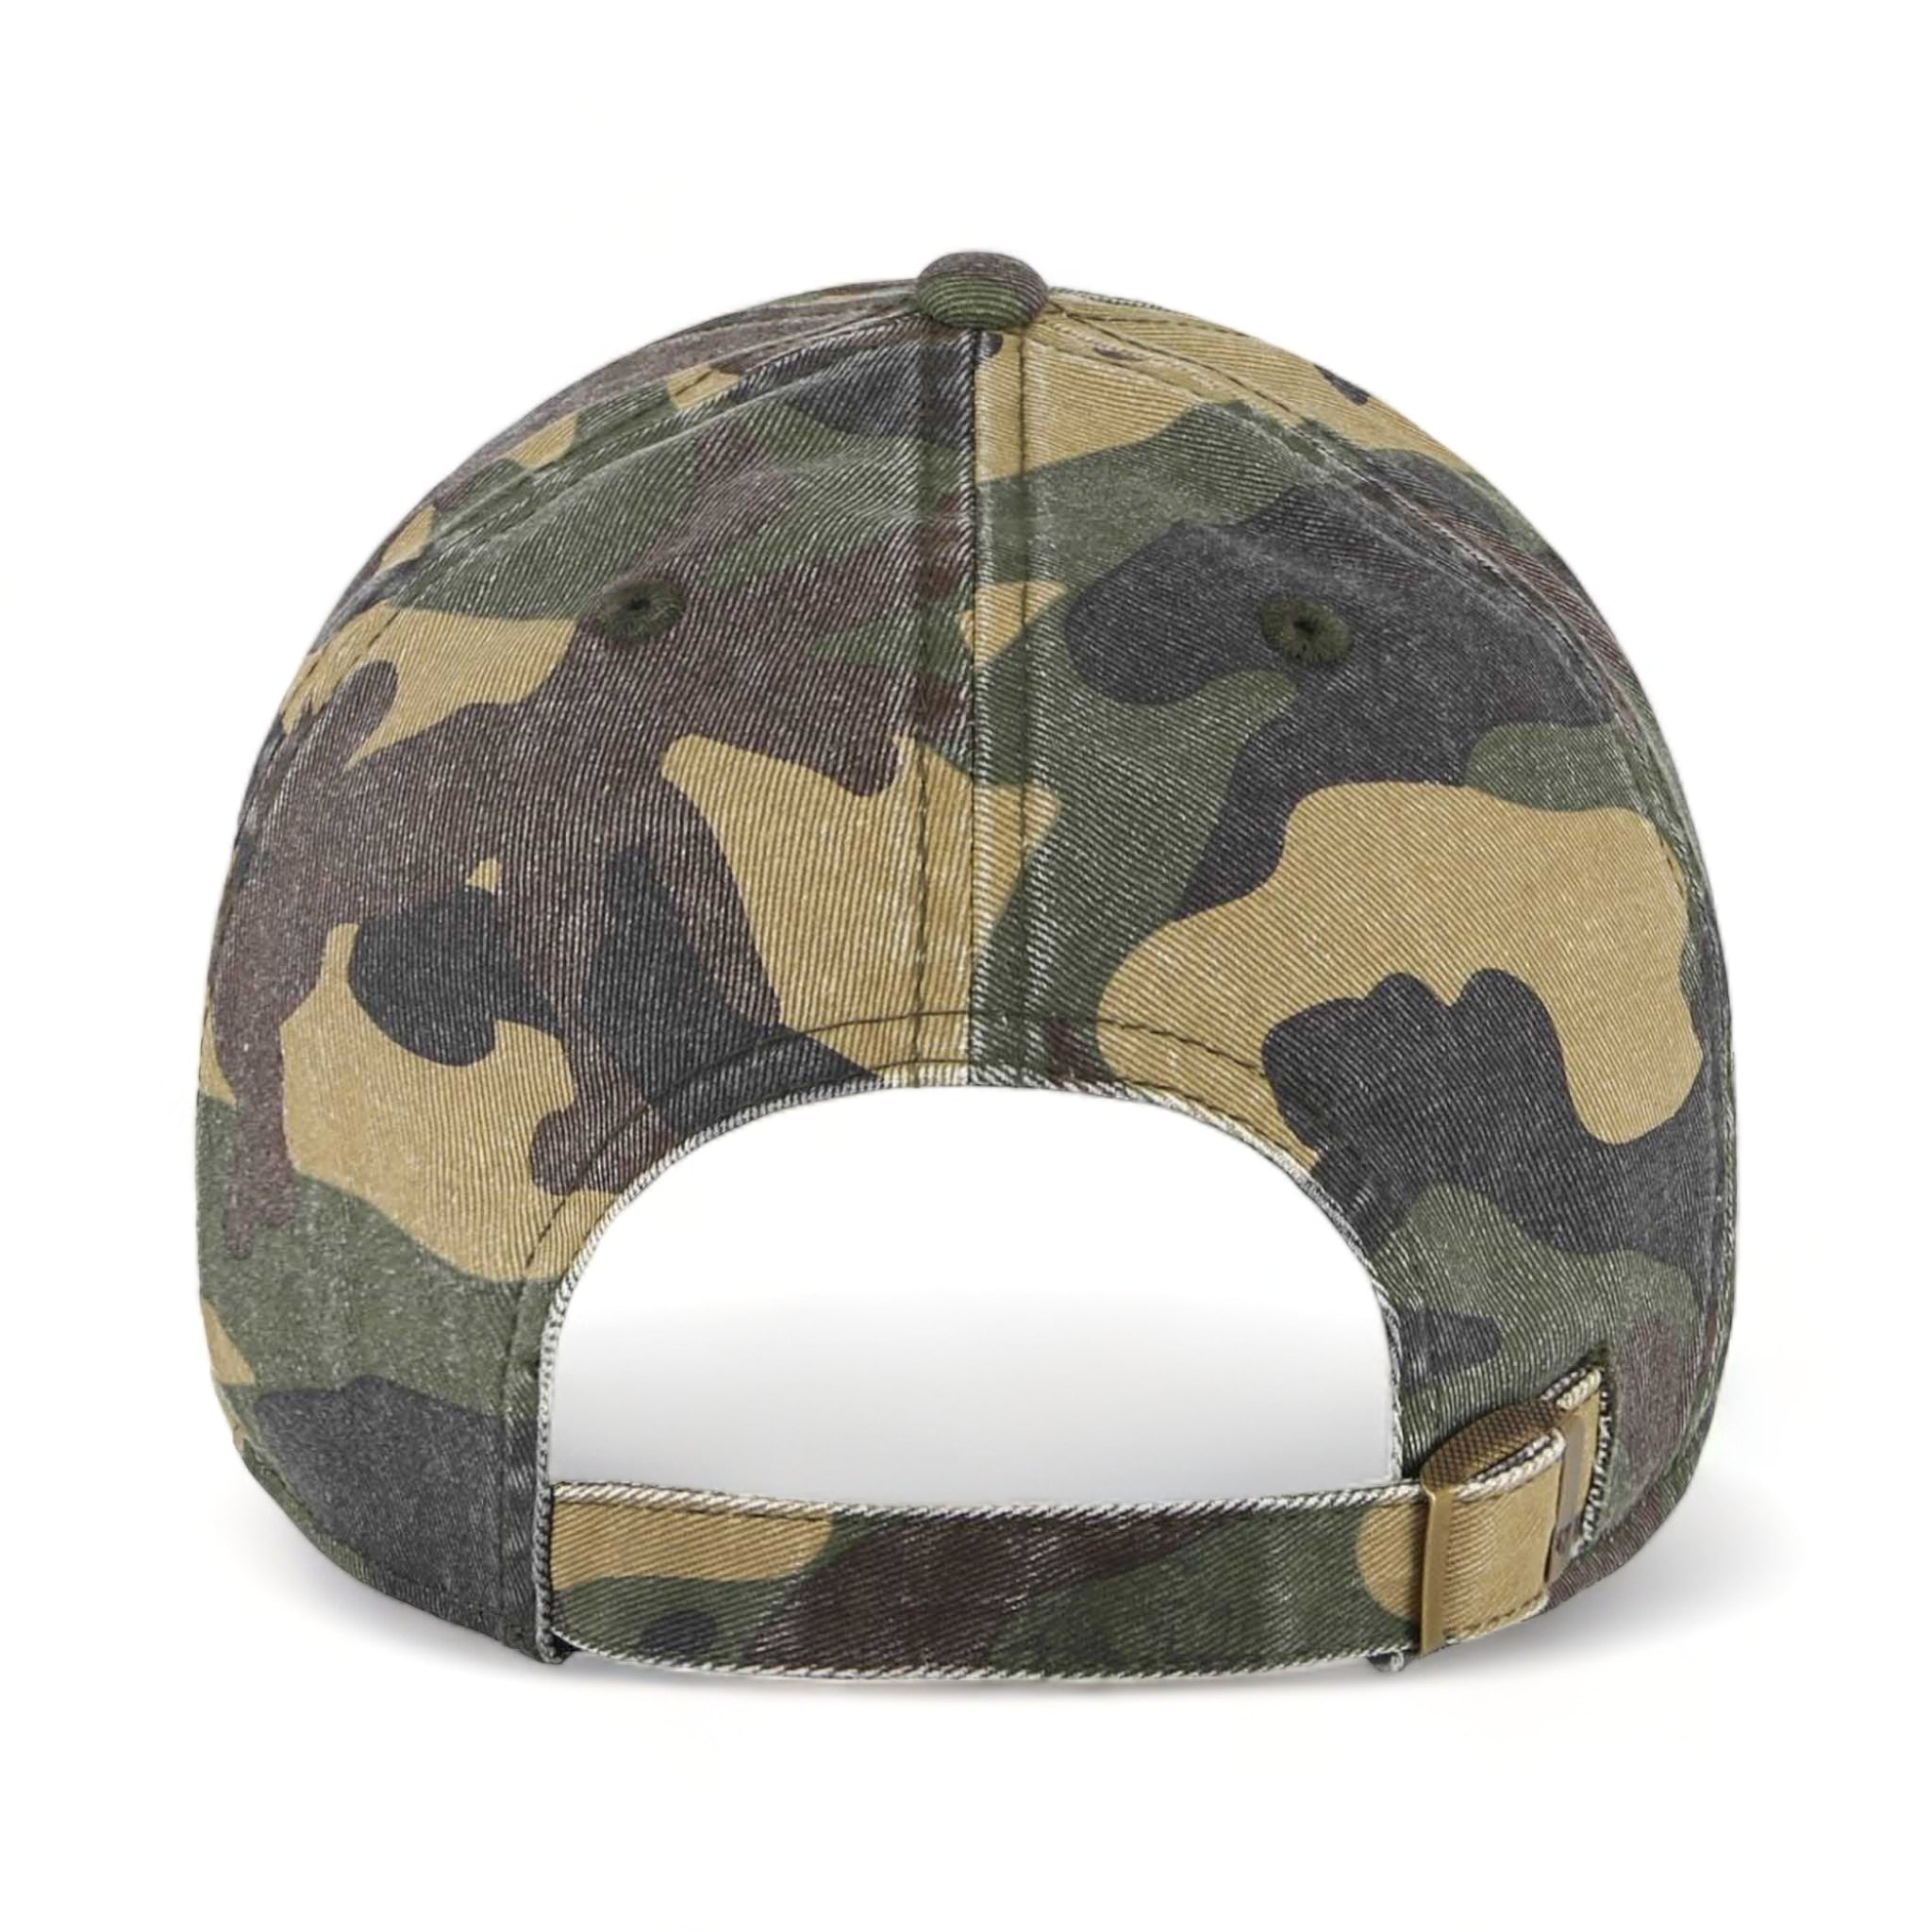 Back view of 47 Brand 4700 custom hat in camo green